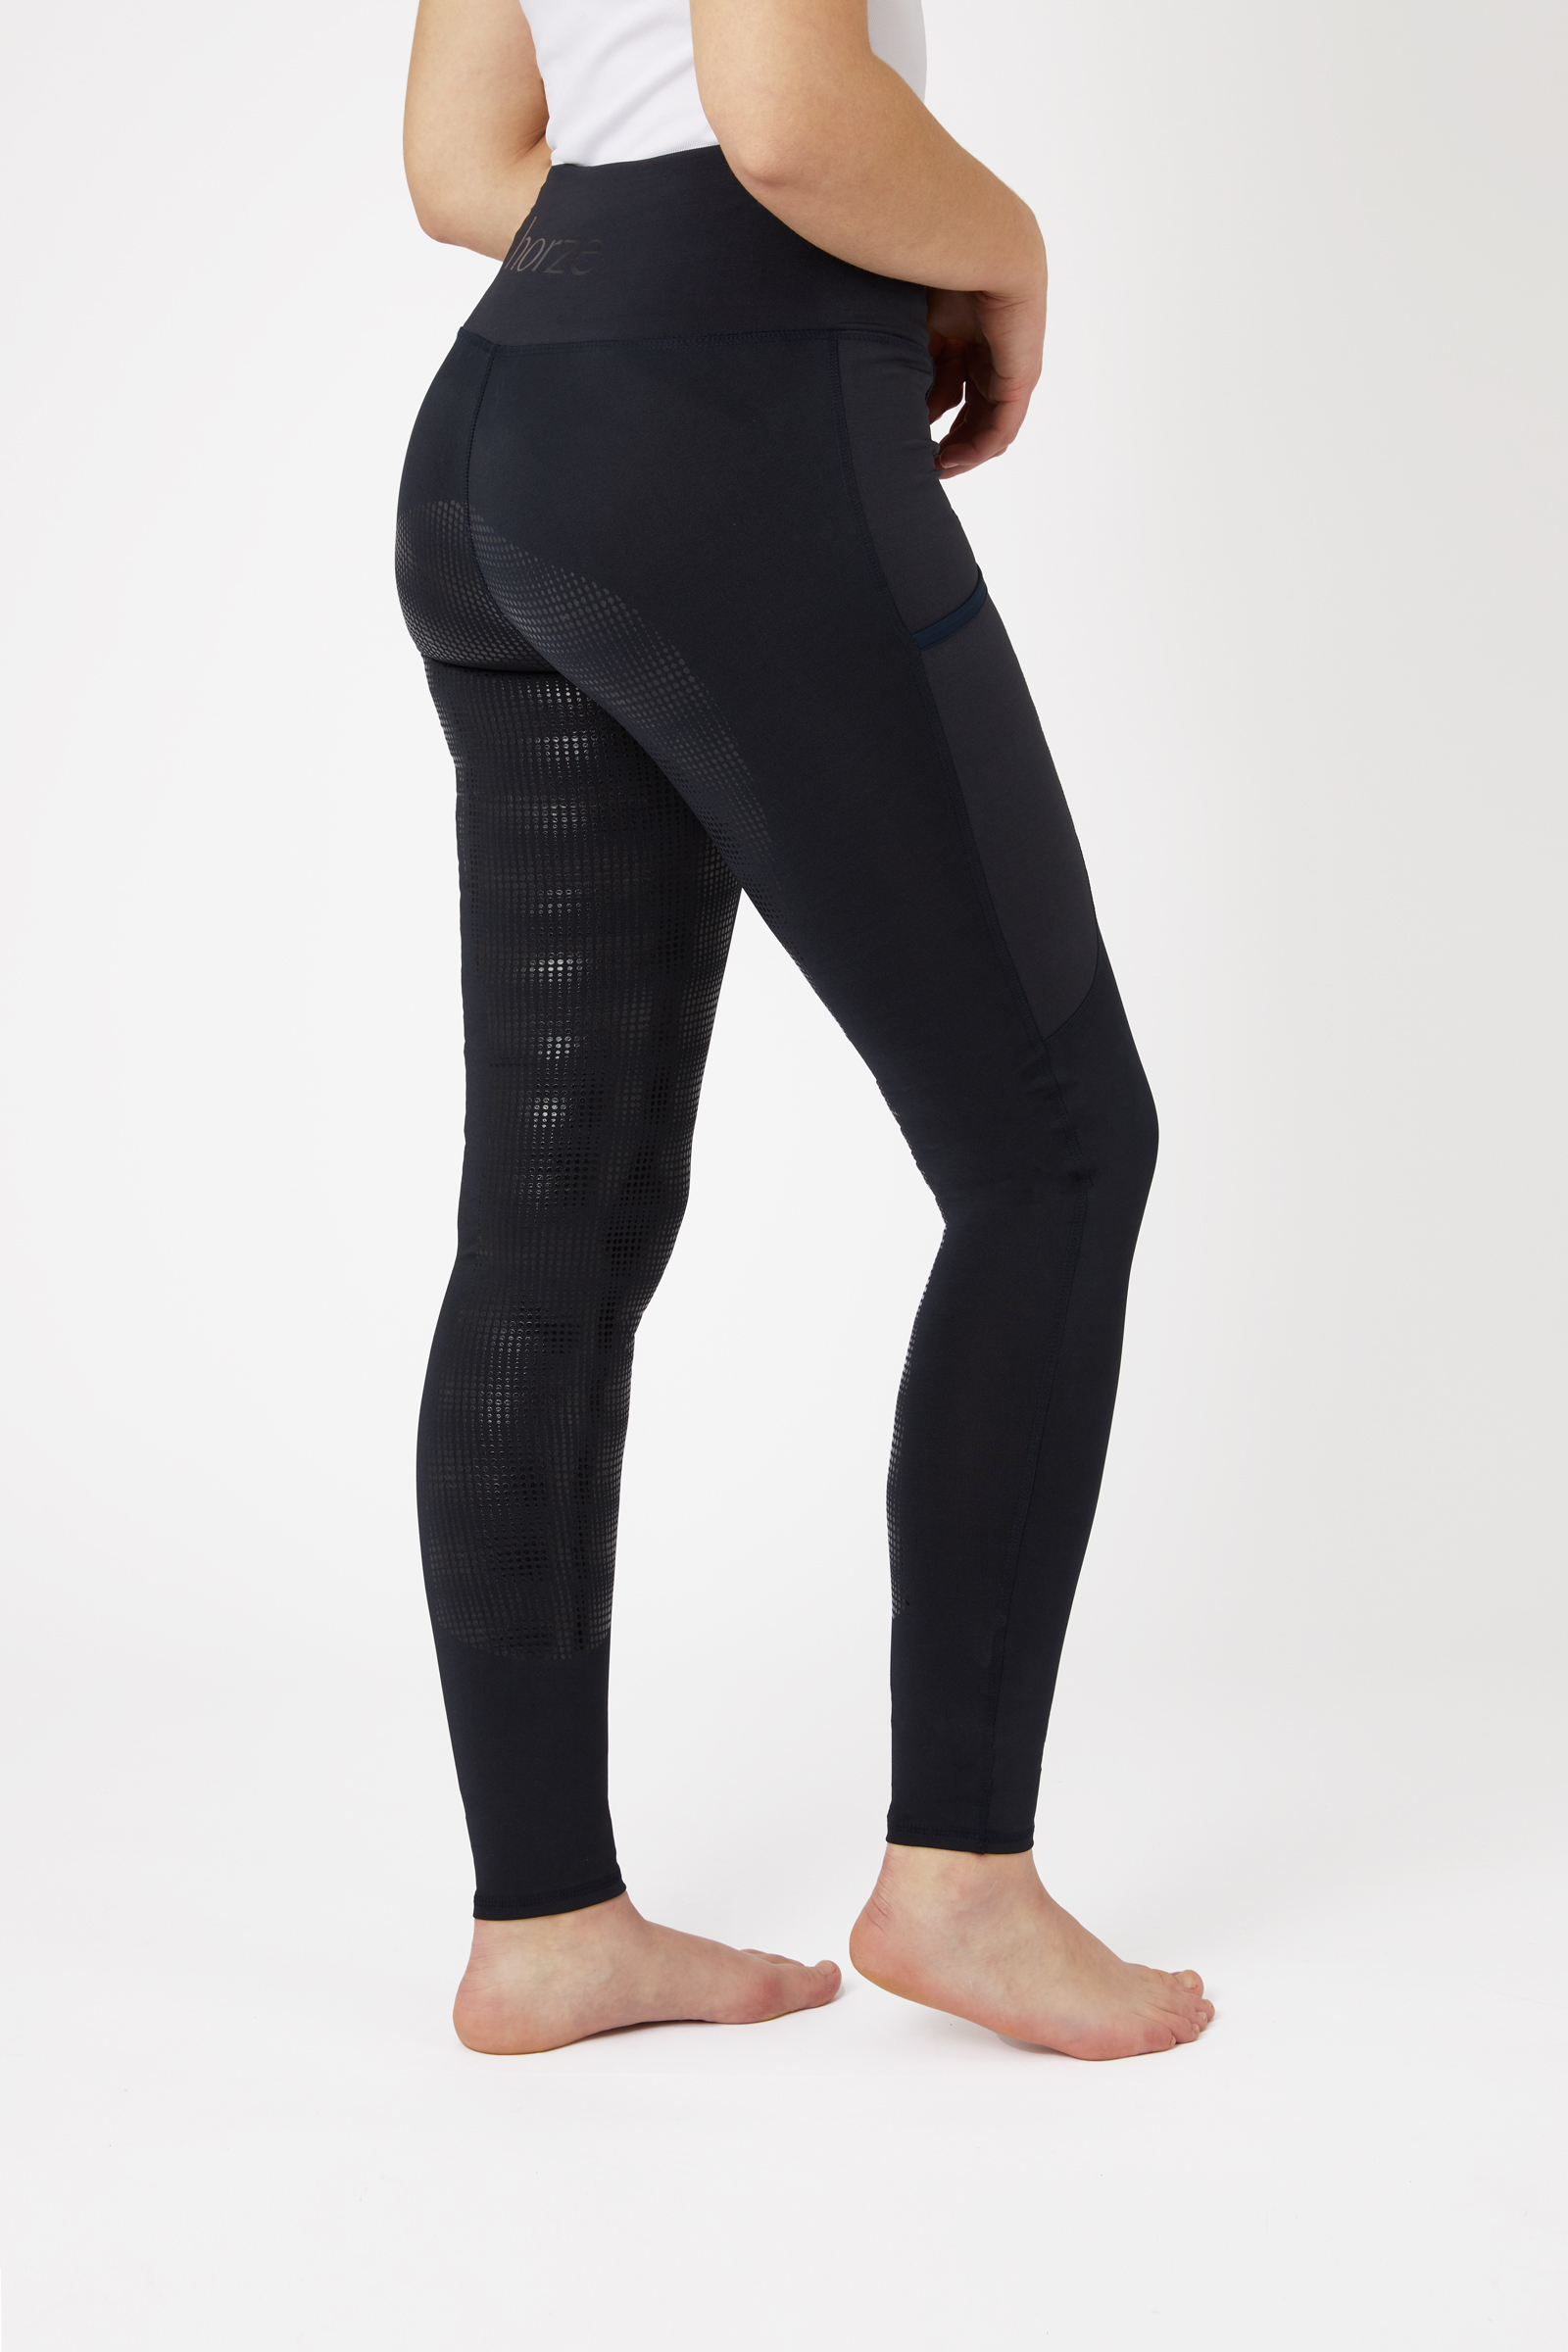 Buy Horze Women's Silicone Full Seat Riding Tights with Phone